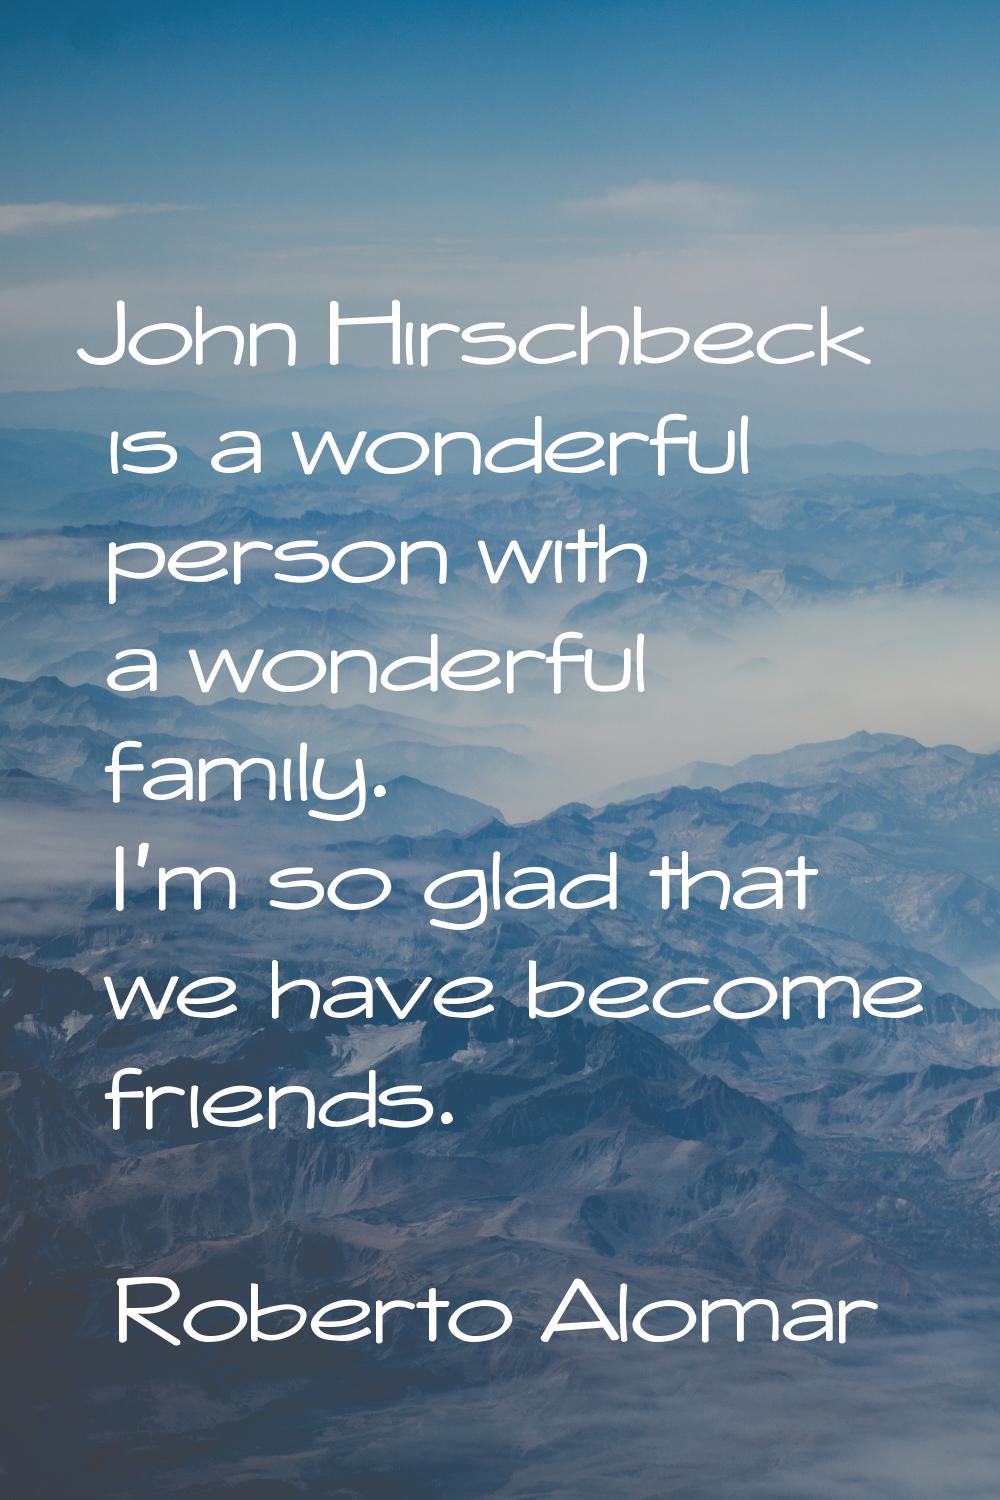 John Hirschbeck is a wonderful person with a wonderful family. I'm so glad that we have become frie